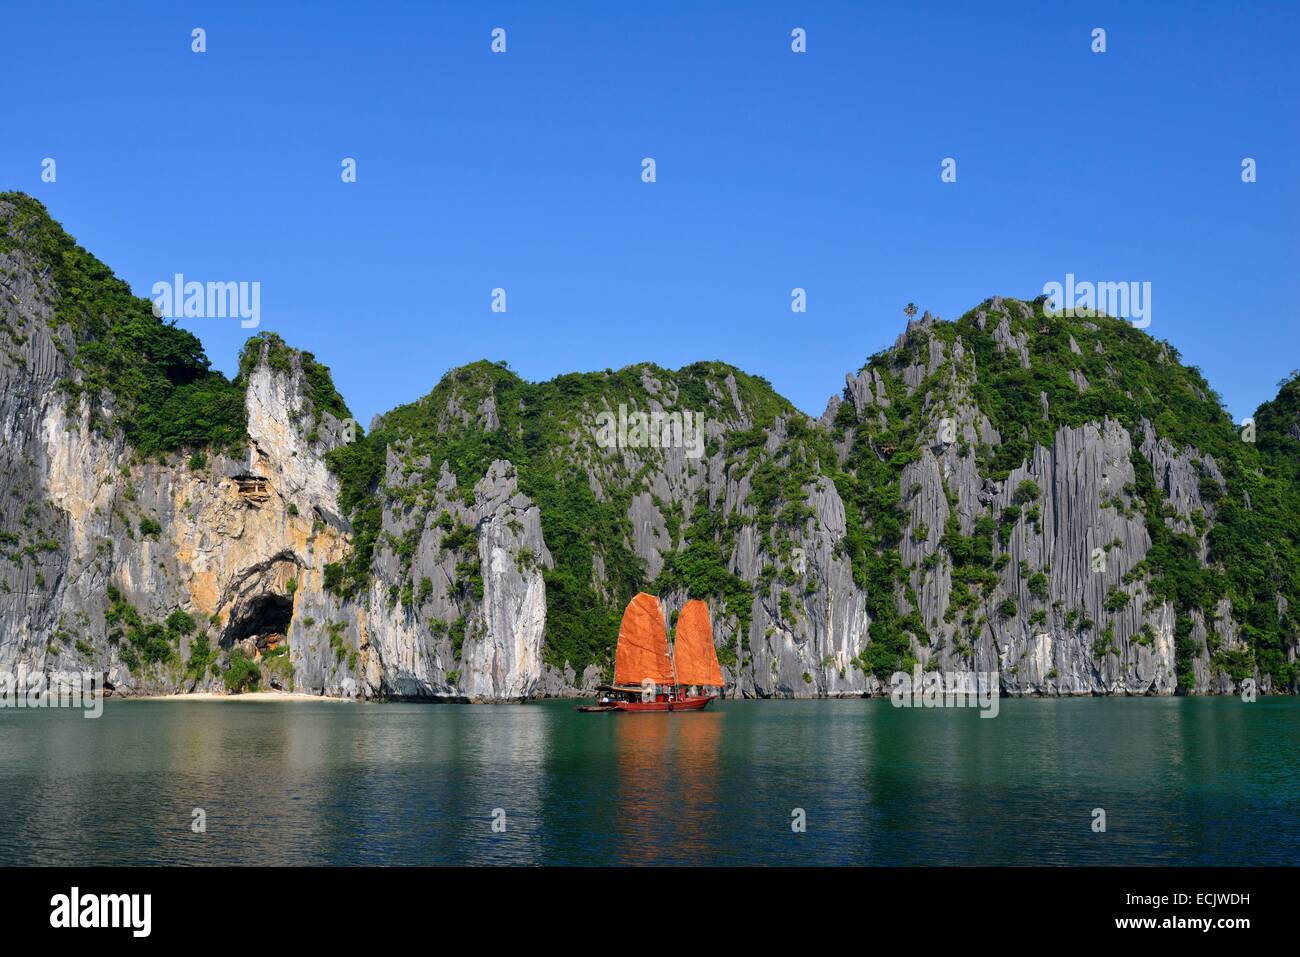 Vietnam, Quang Ninh province, Ha Long bay, listed as World Heritage by UNESCO, junk boat in the bay Stock Photo